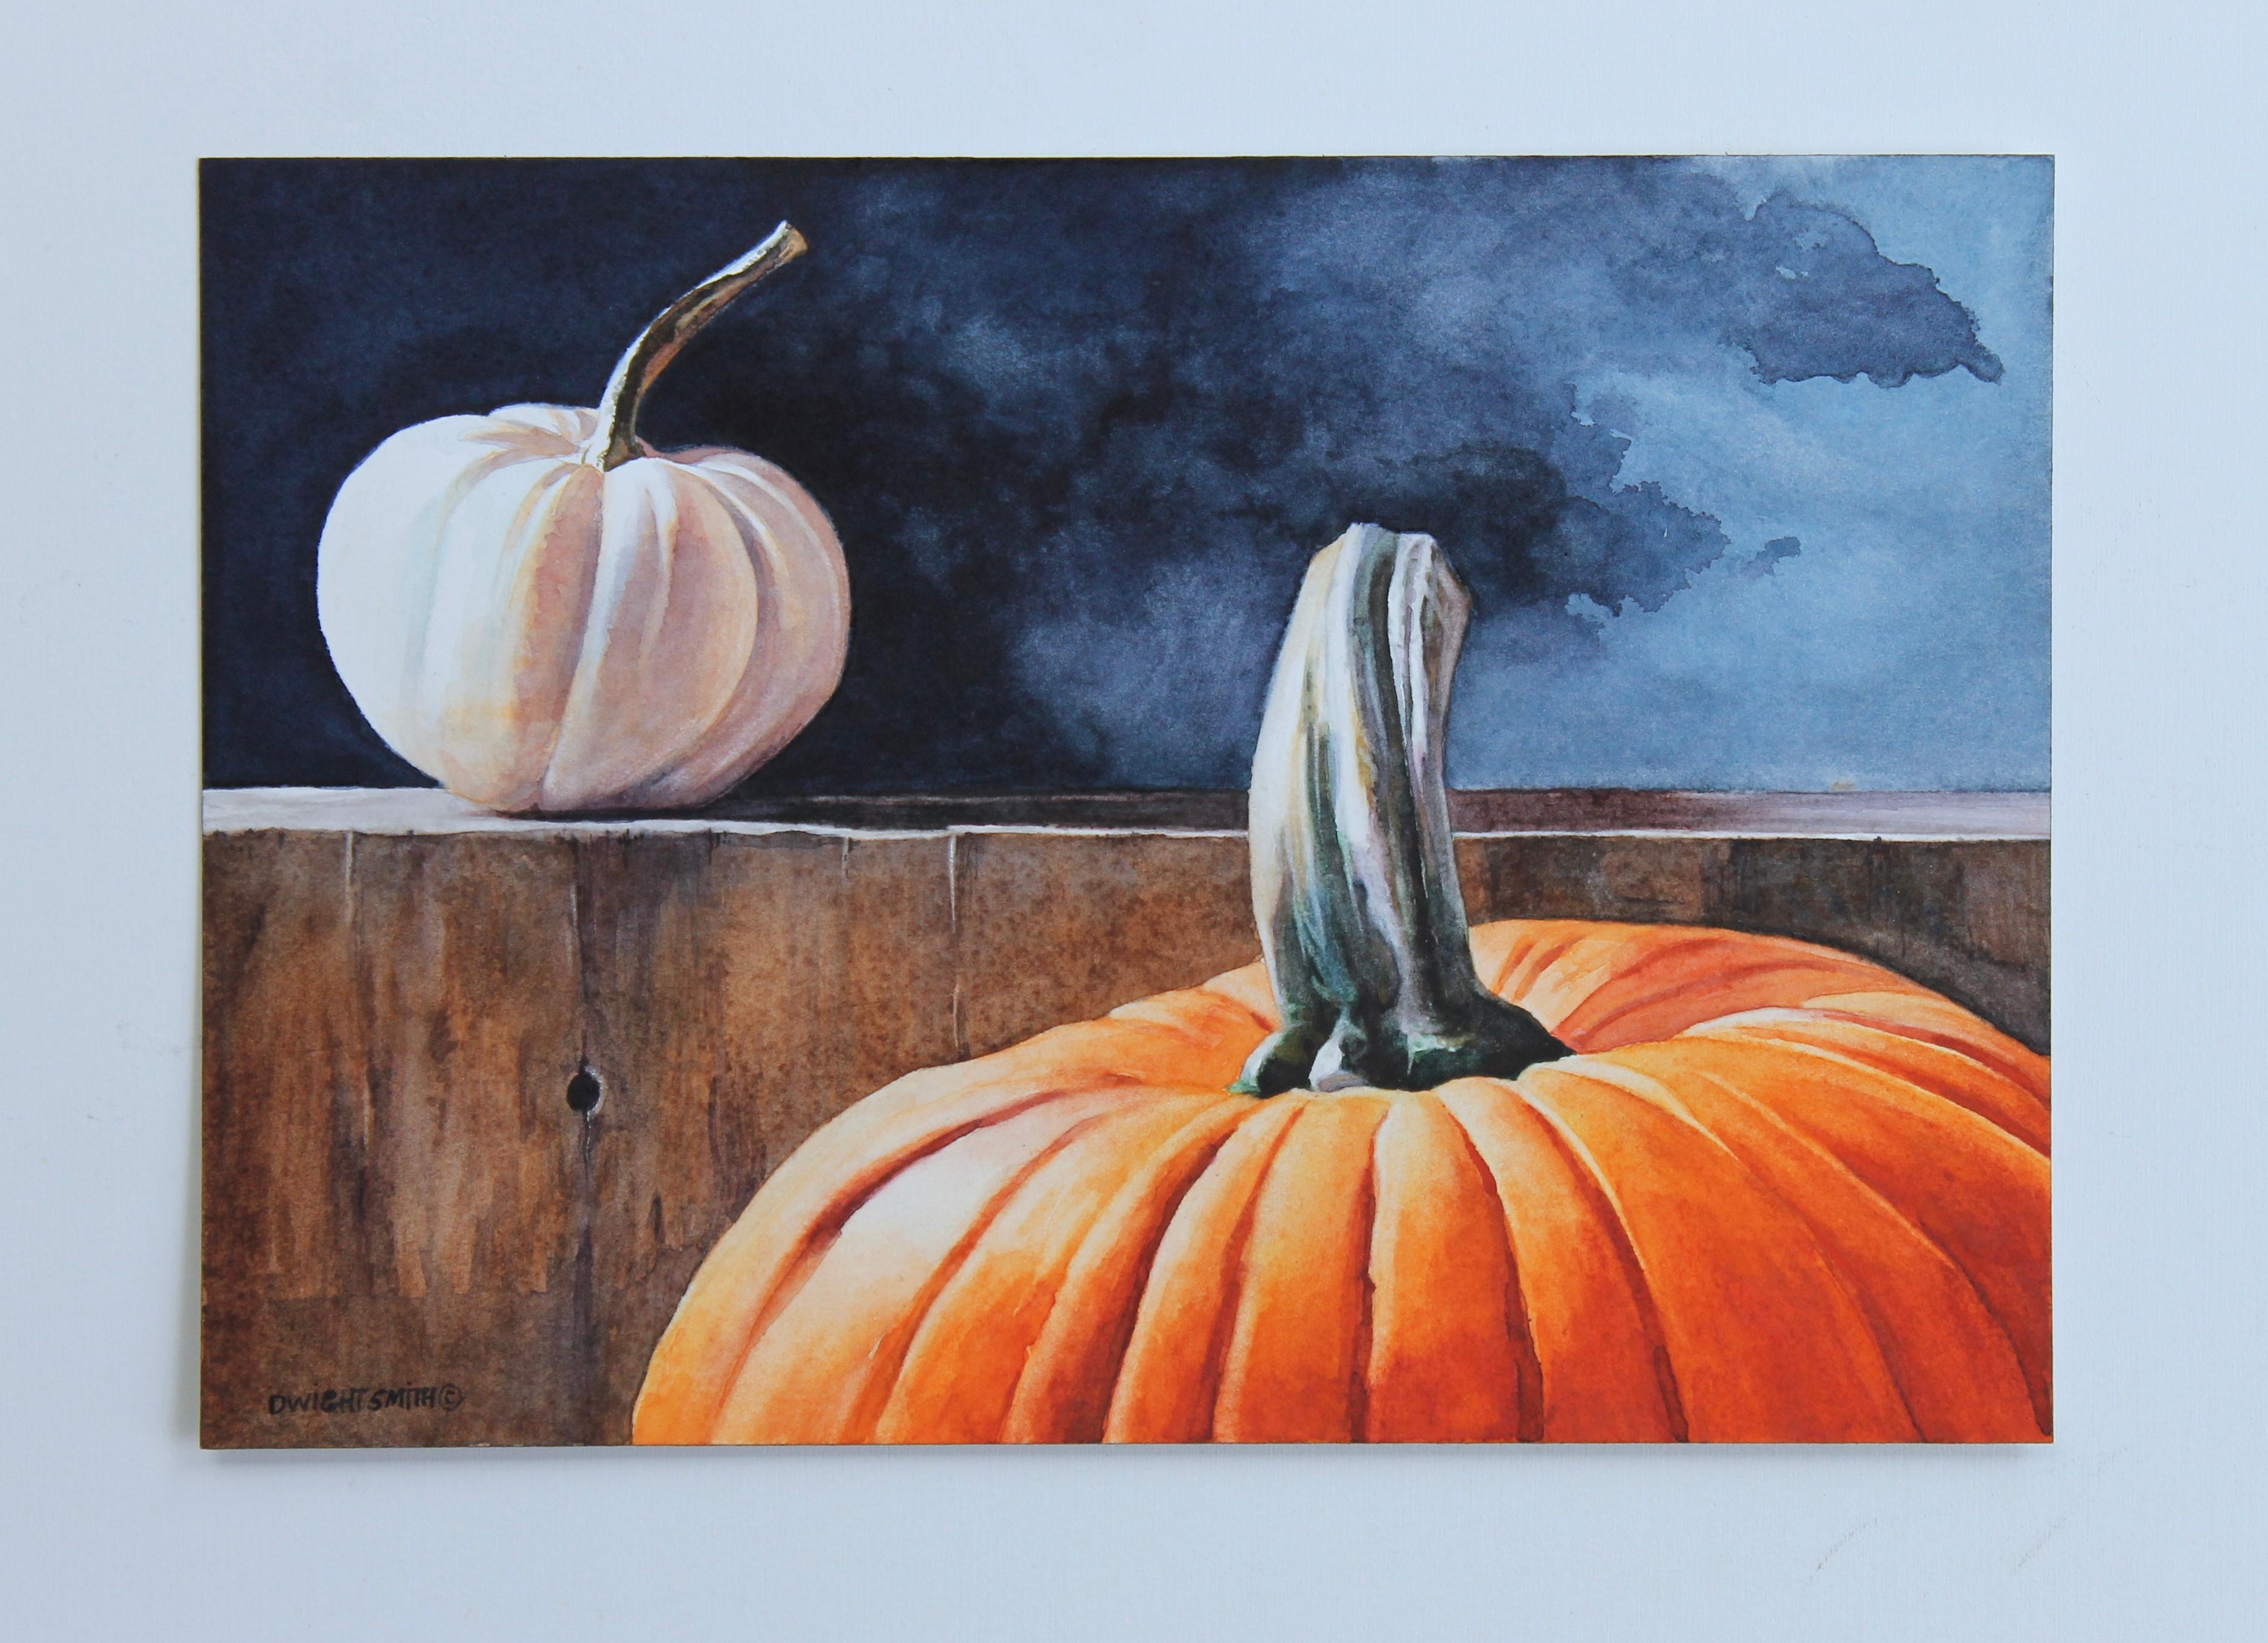 <p>Artist Comments<br>My favorite season is autumn for many reasons.  One is all the squashes with fall colors.  I spotted these cool white squash in the store and thought they would make an interesting still life.  Full Moon is the title of this